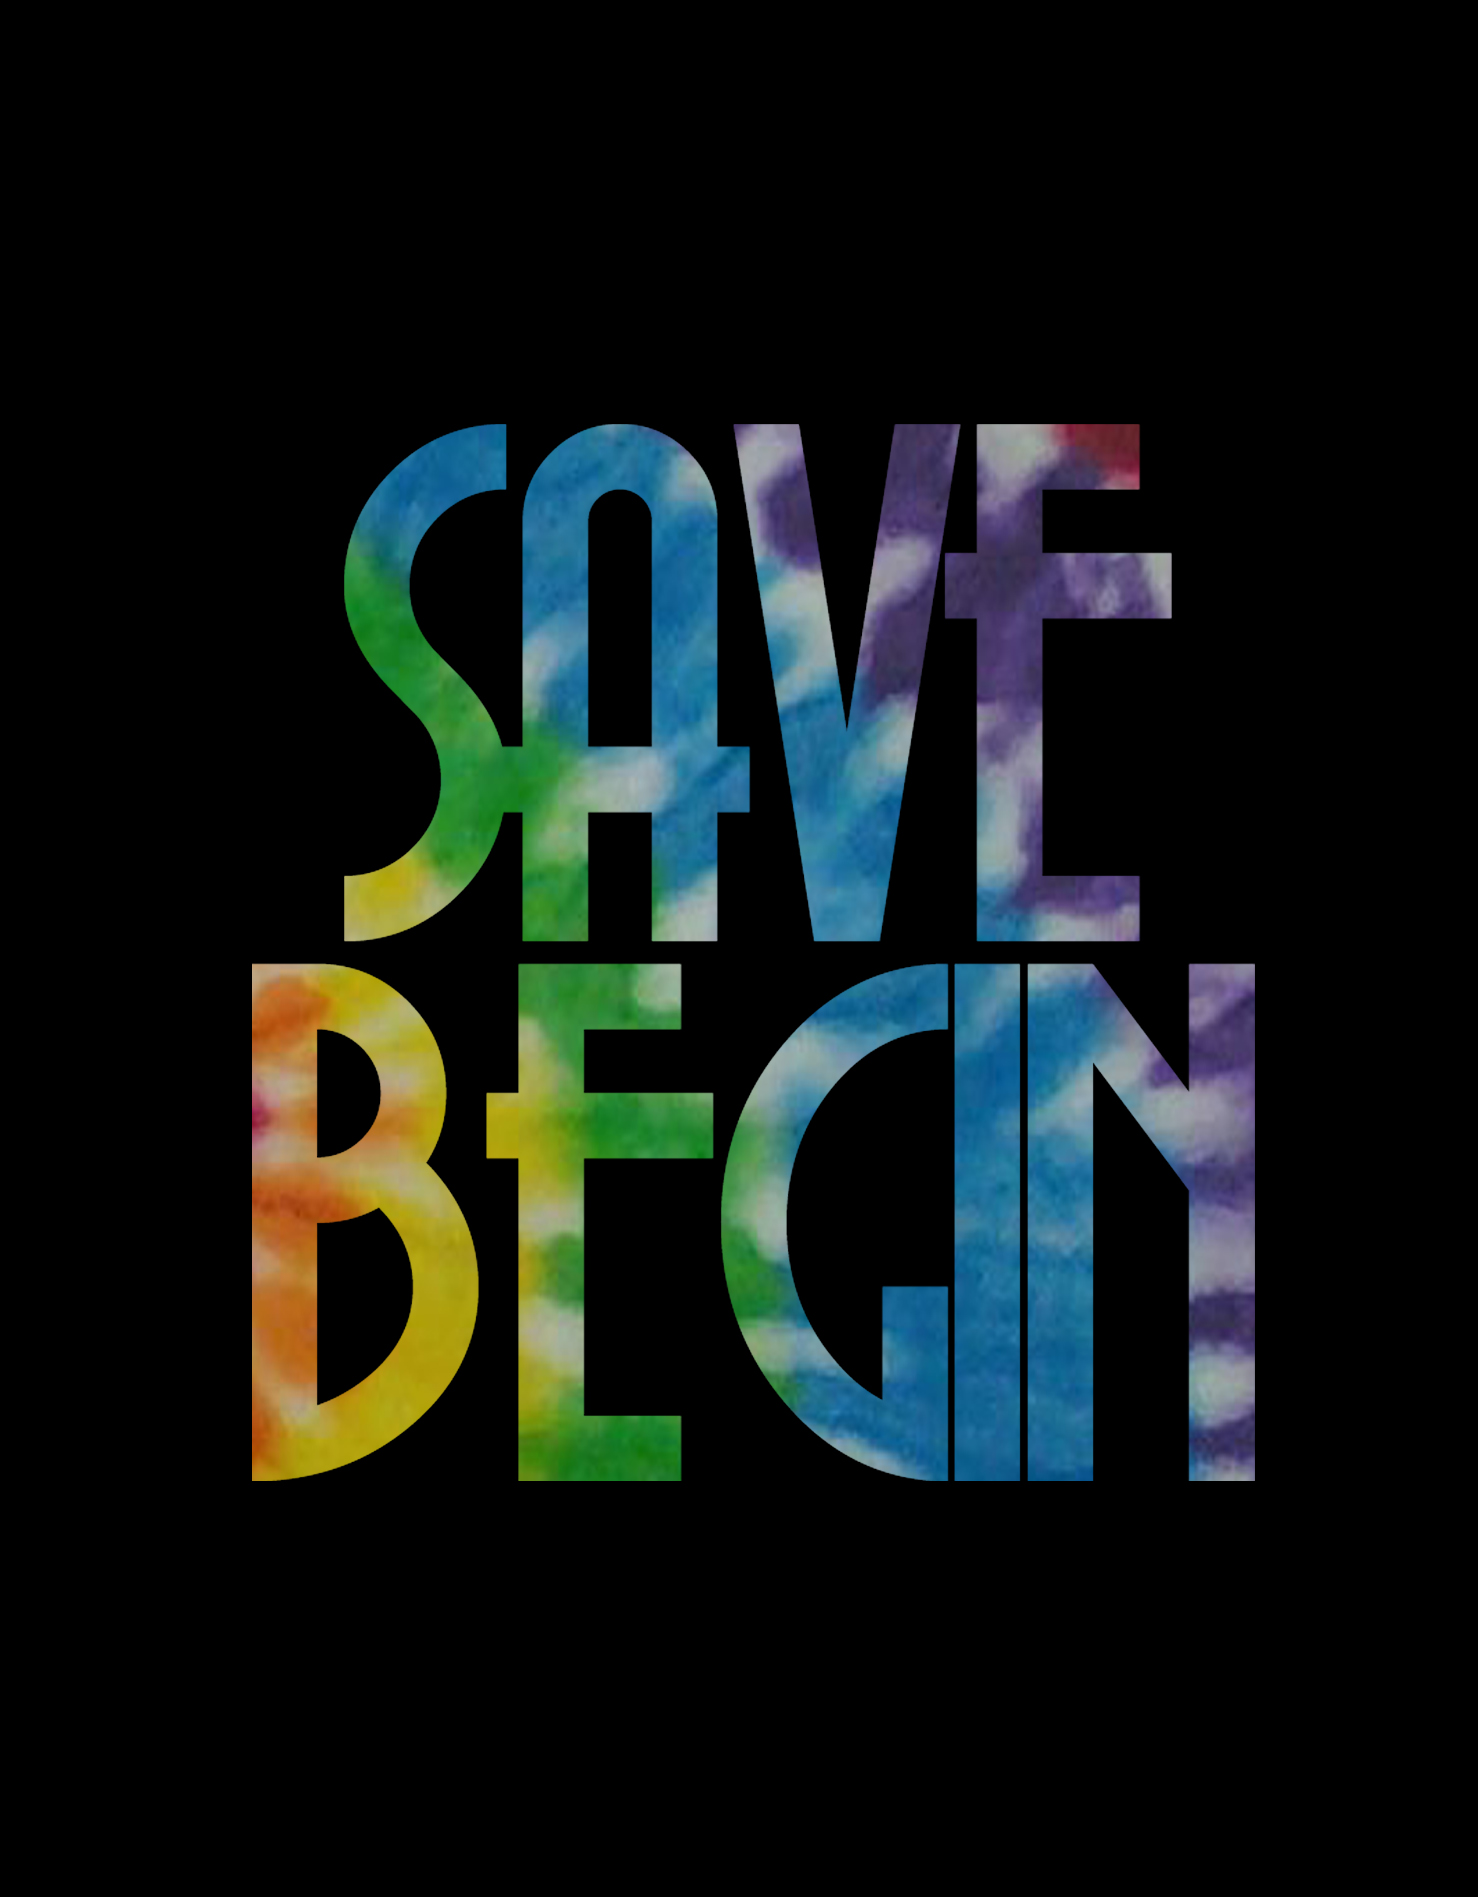 Save Begin cover